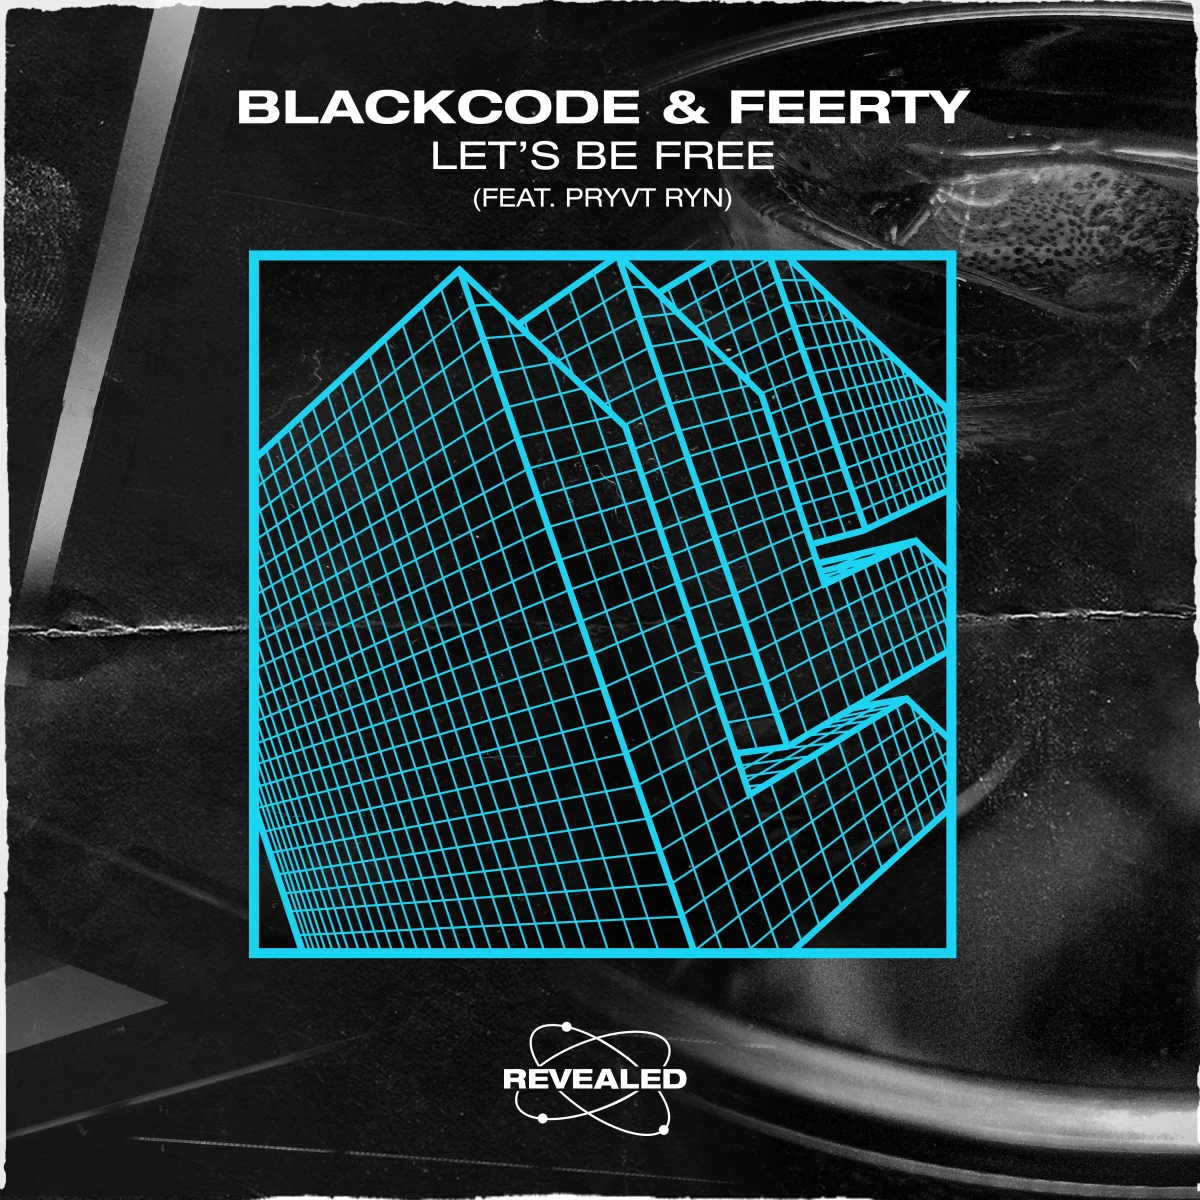 Let's Be Free - Blackcode⁠ & Feerty⁠ feat. PRYVT RYN⁠